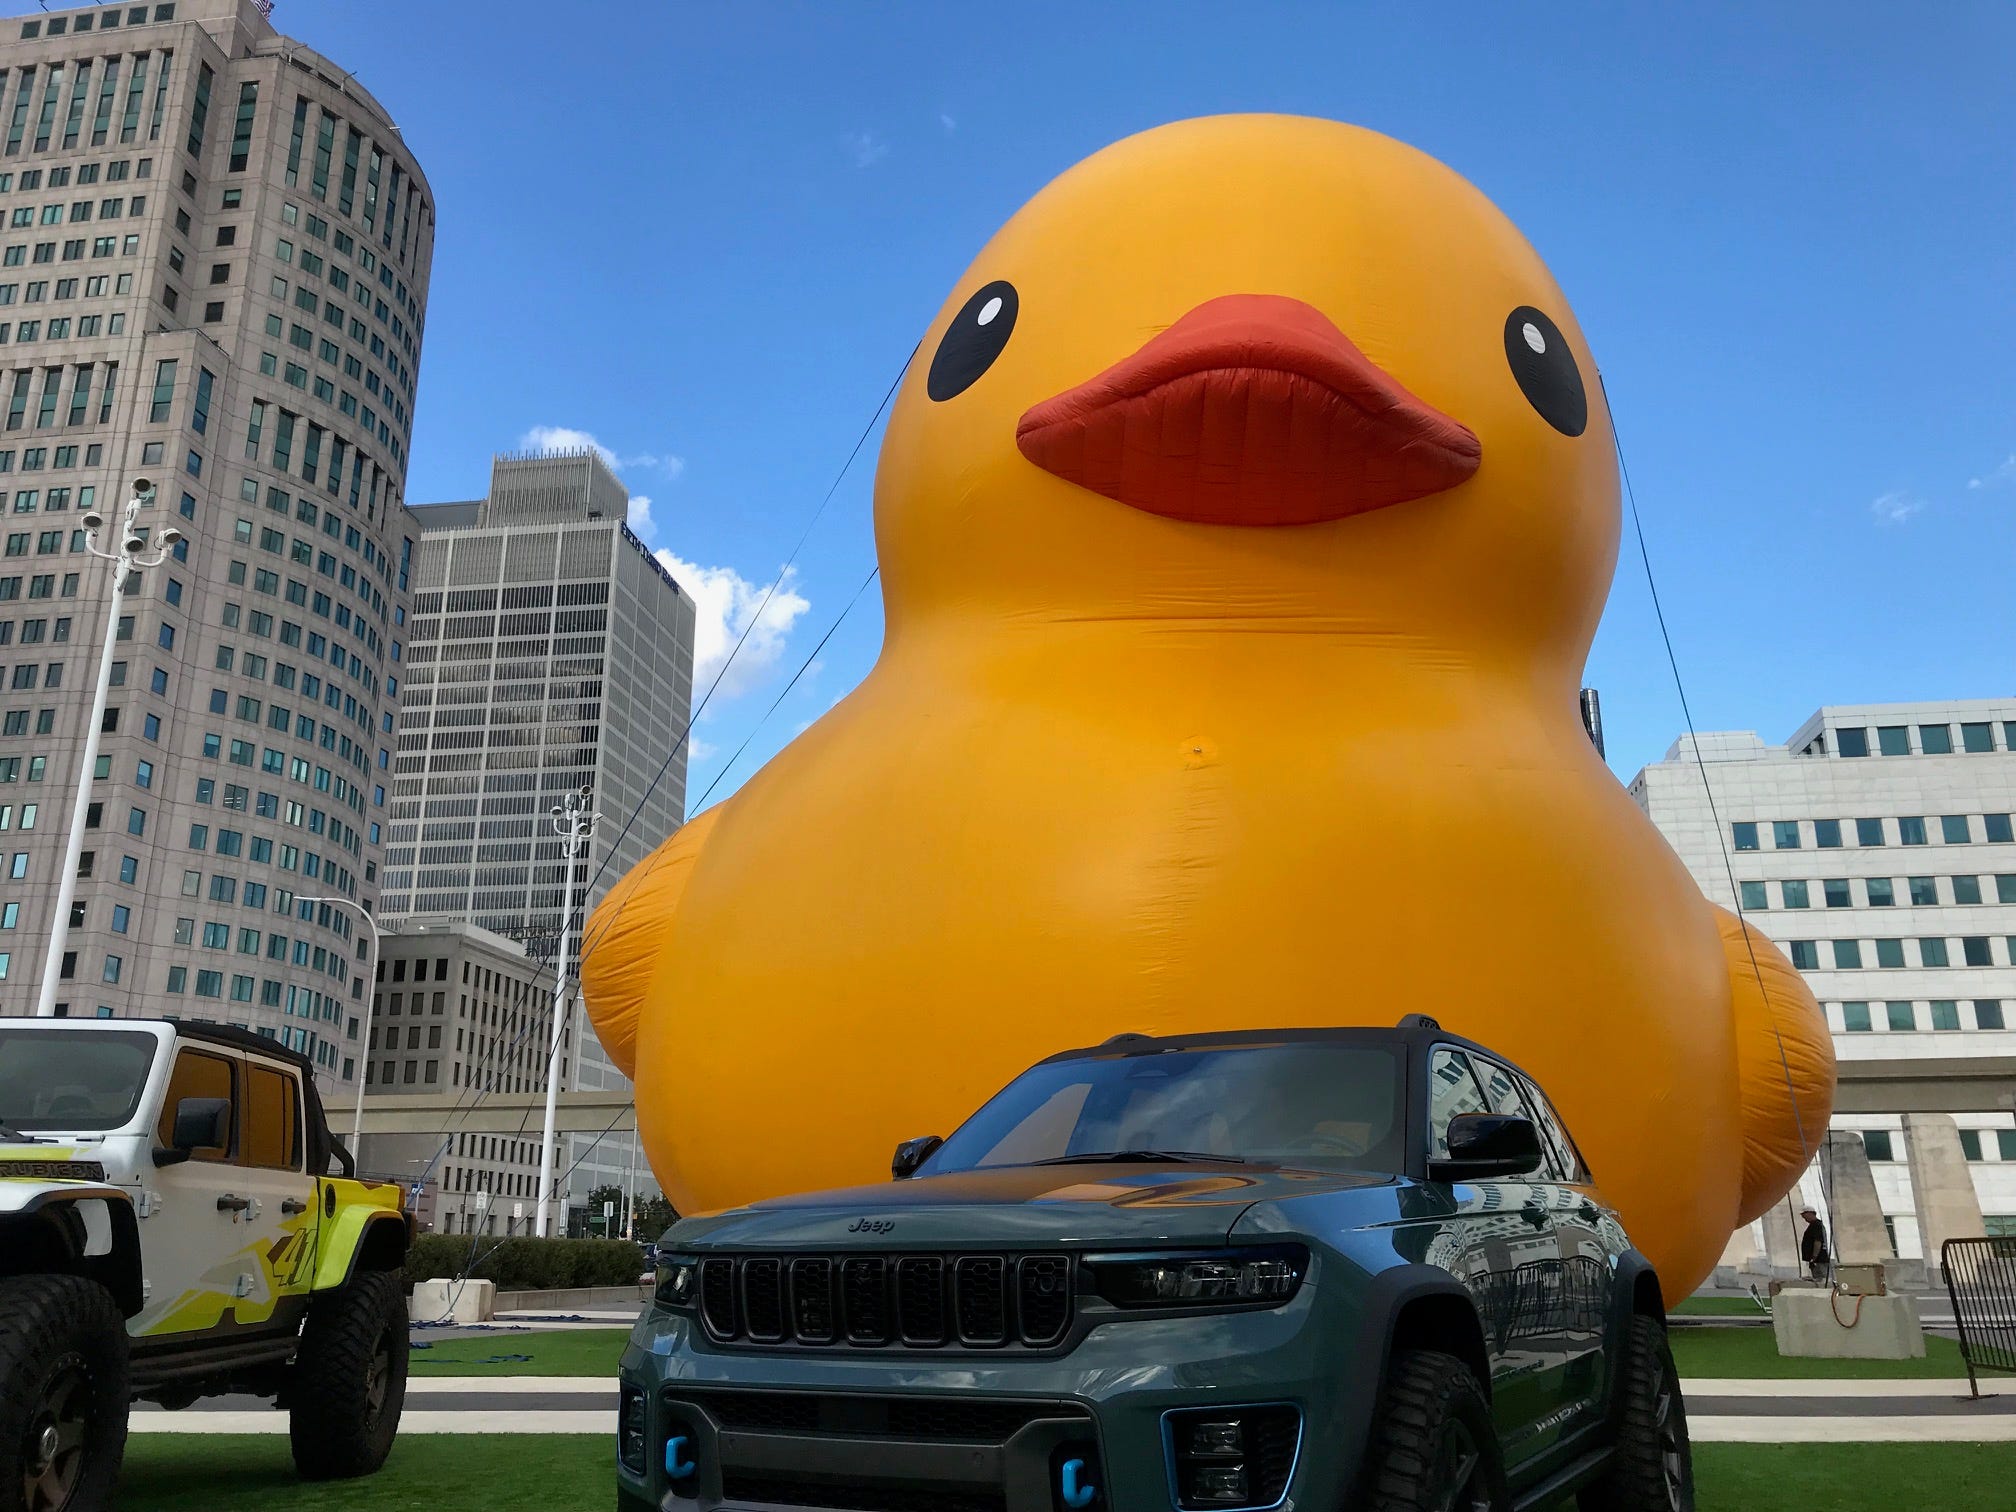 A huge rubber duck is inflated next to two Jeeps in front of Huntington Place in preparation for the North American International Auto Show in Detroit on Sept. 13, 2022.